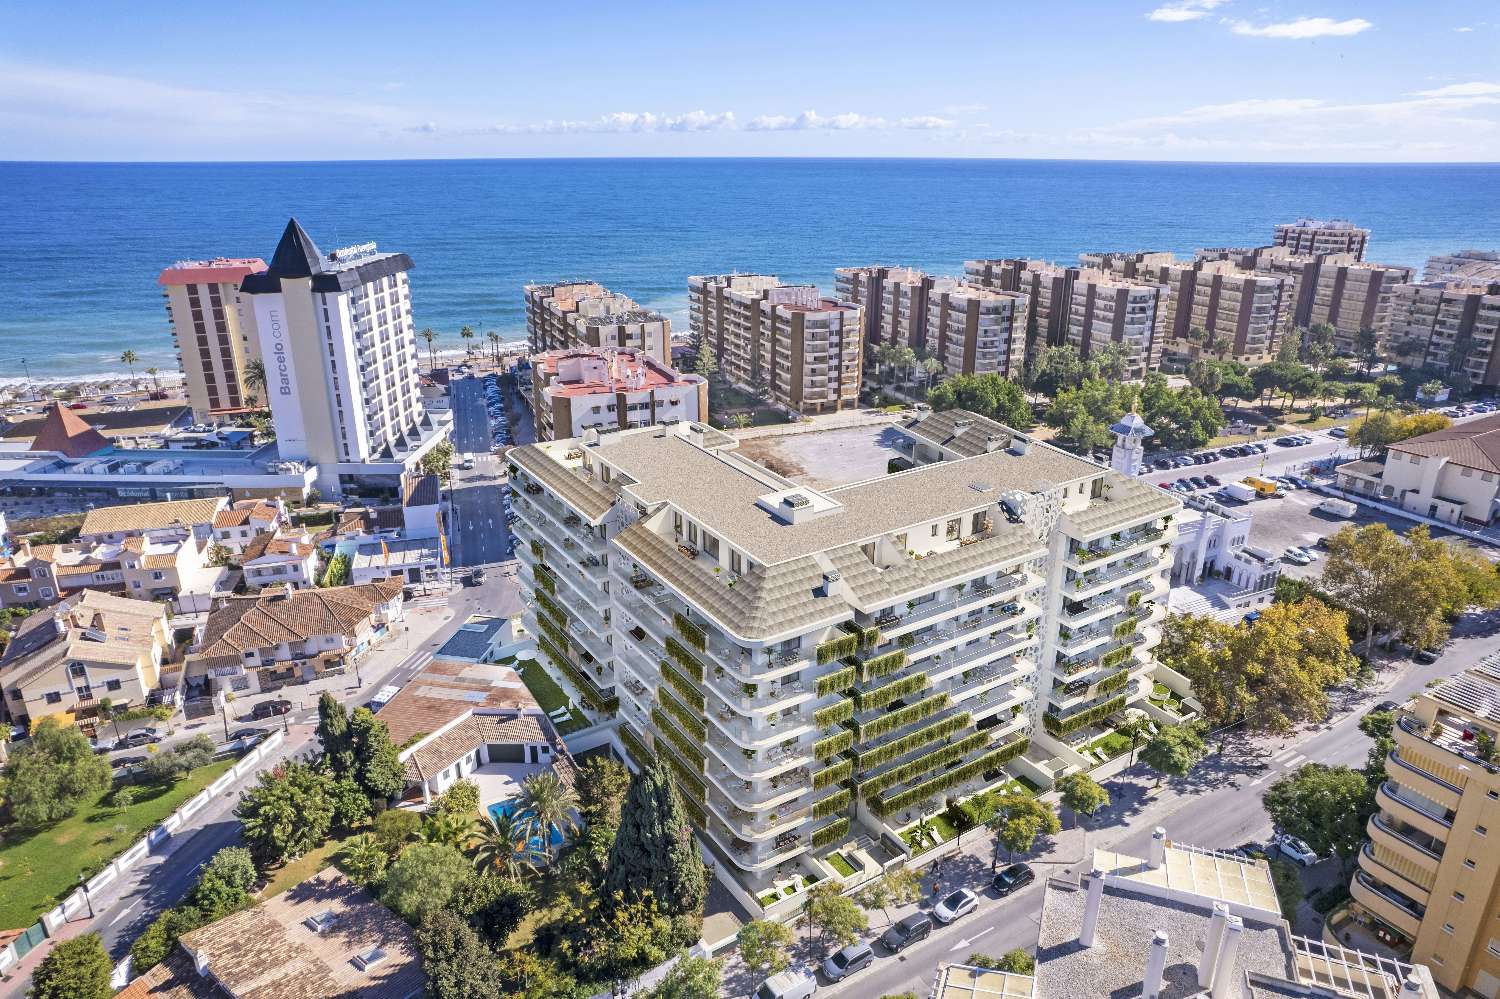 New promotion 2 bedrooms and 2 bathrooms with terrace, parking and storage room in the Center of Fuengirola